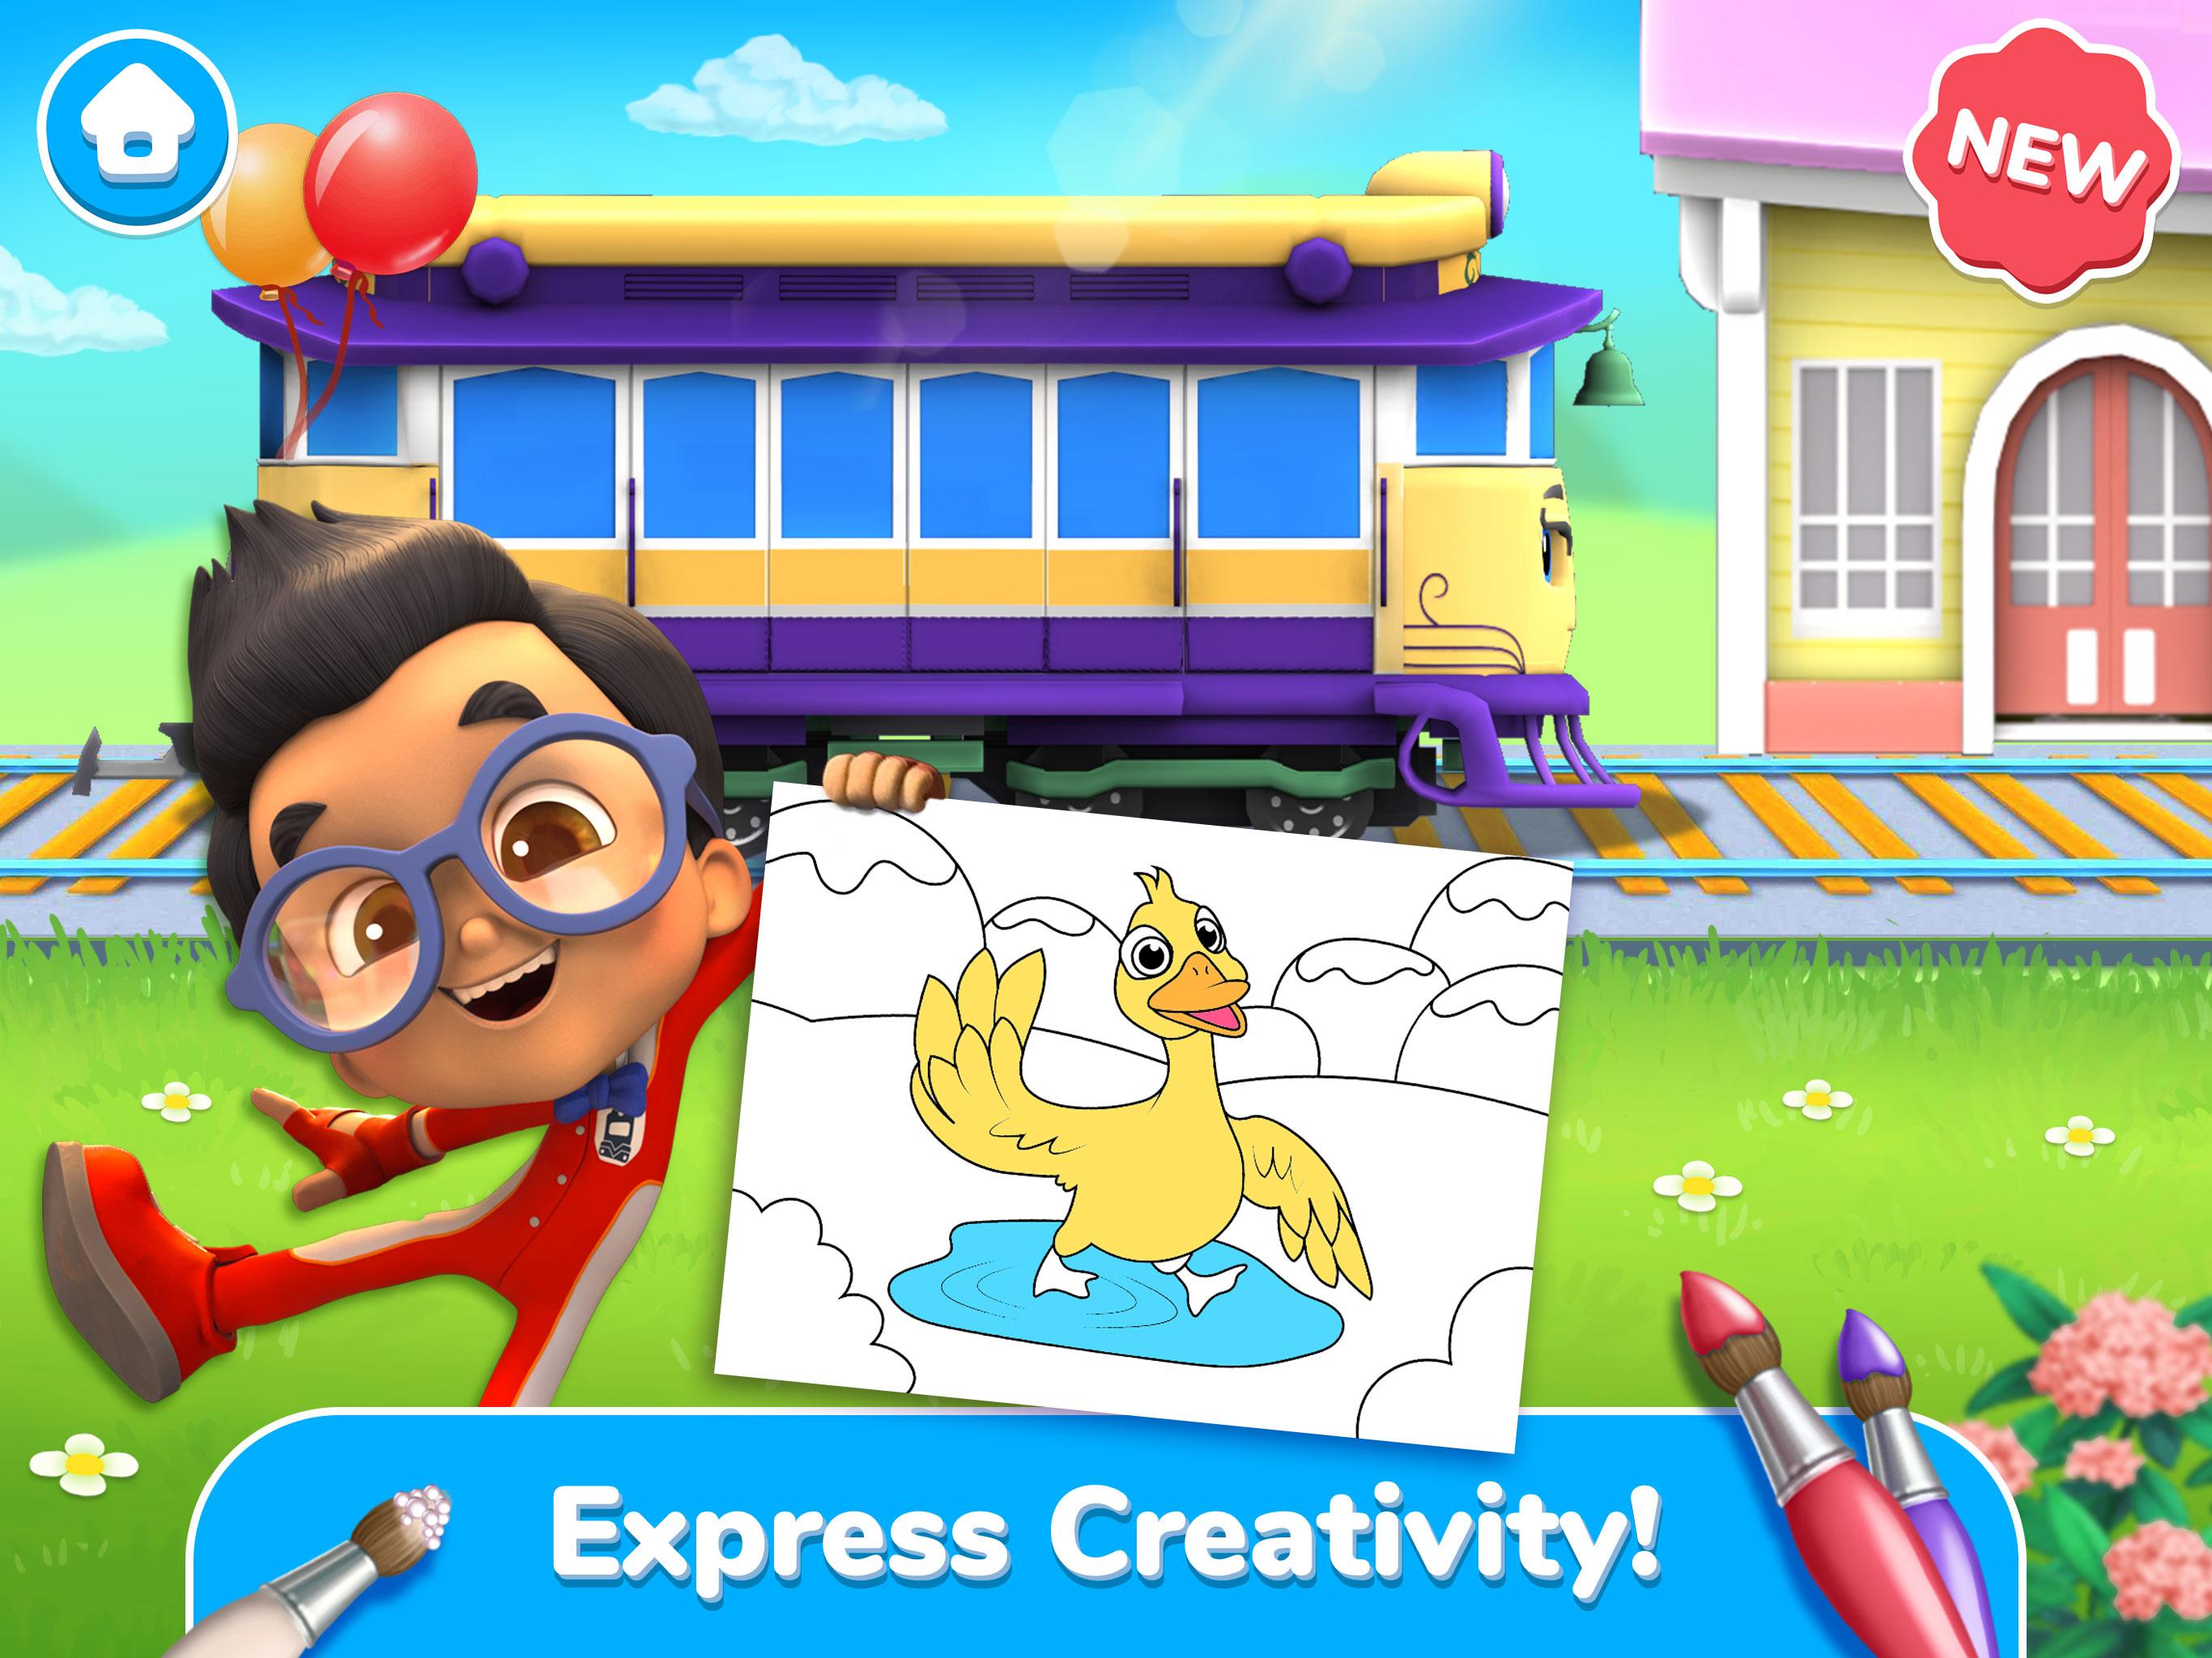 Mighty Express Play & Learn with Train Friends 1.3.1 Screenshot 17